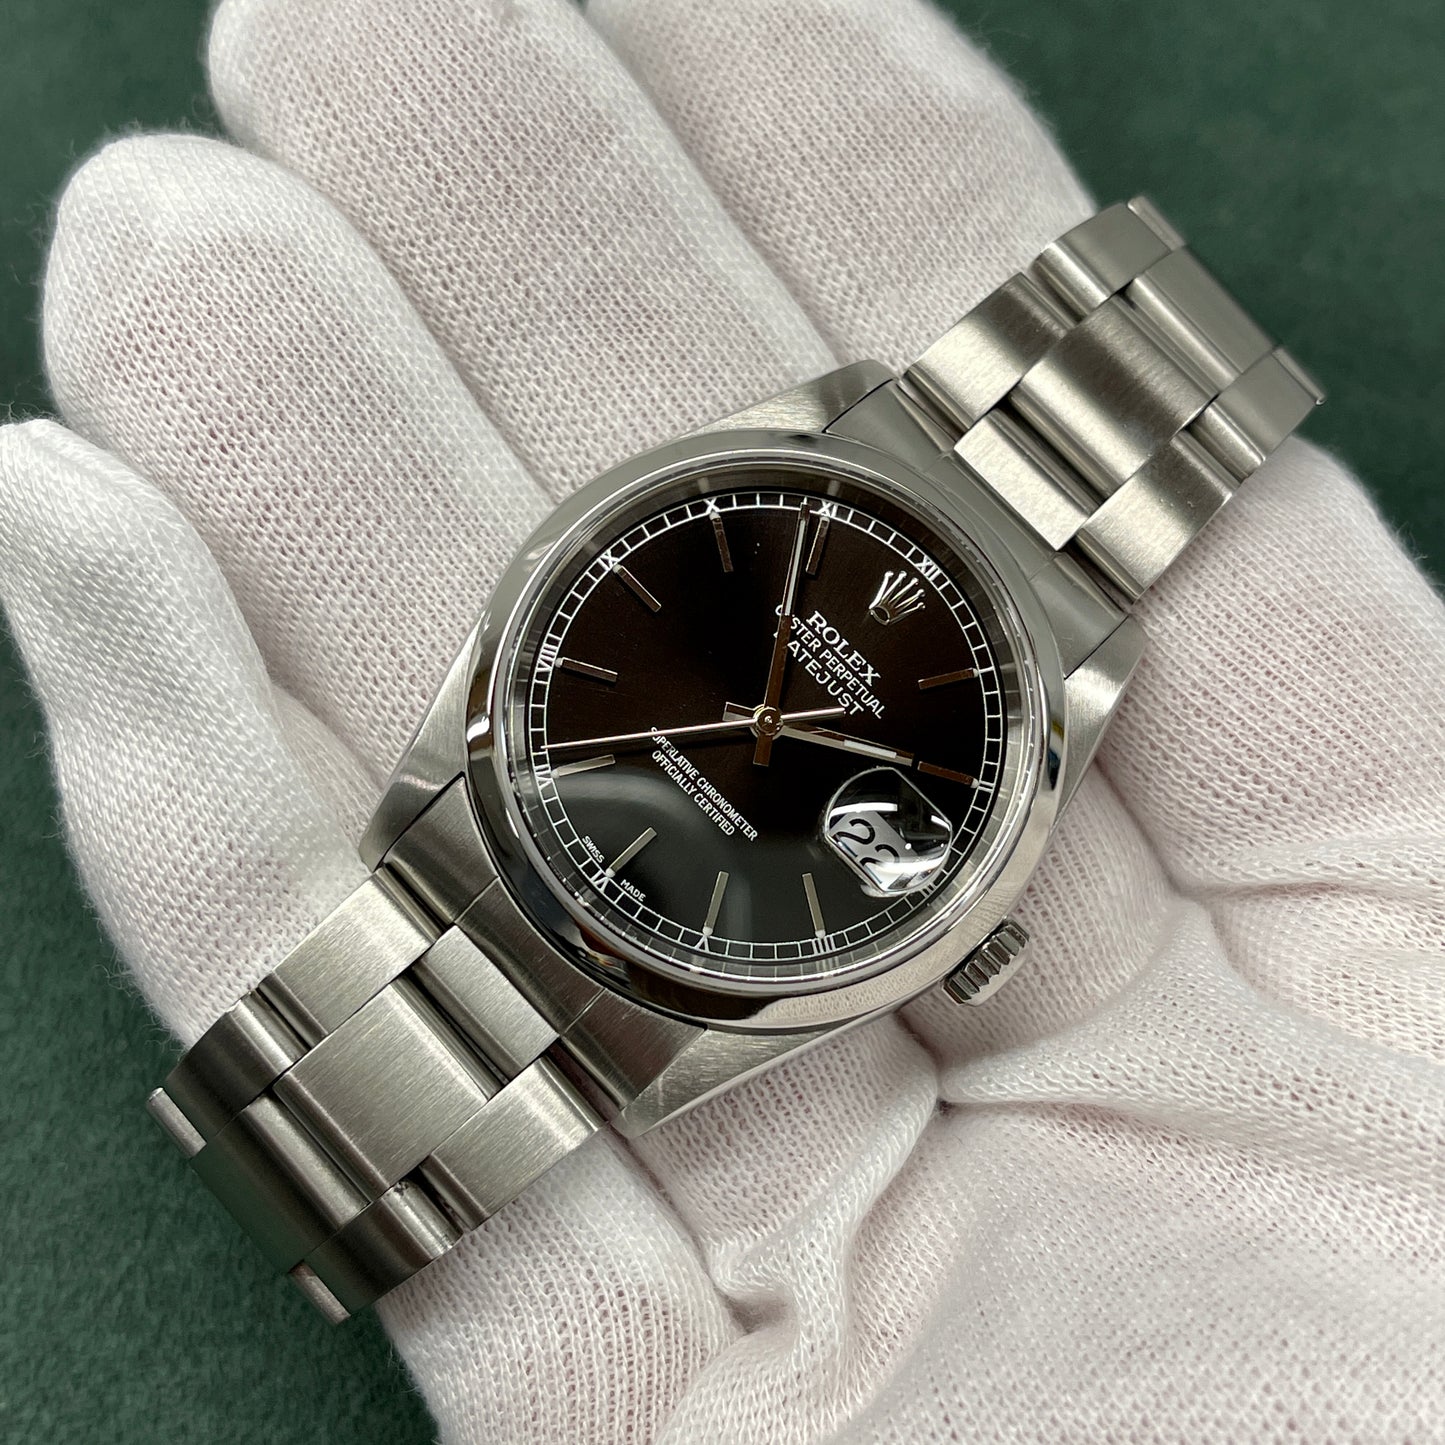 2001 Rolex Datejust 16200 Black Stick Oyster Perpetual Automatic Wristwatch - Hashtag Watch Company